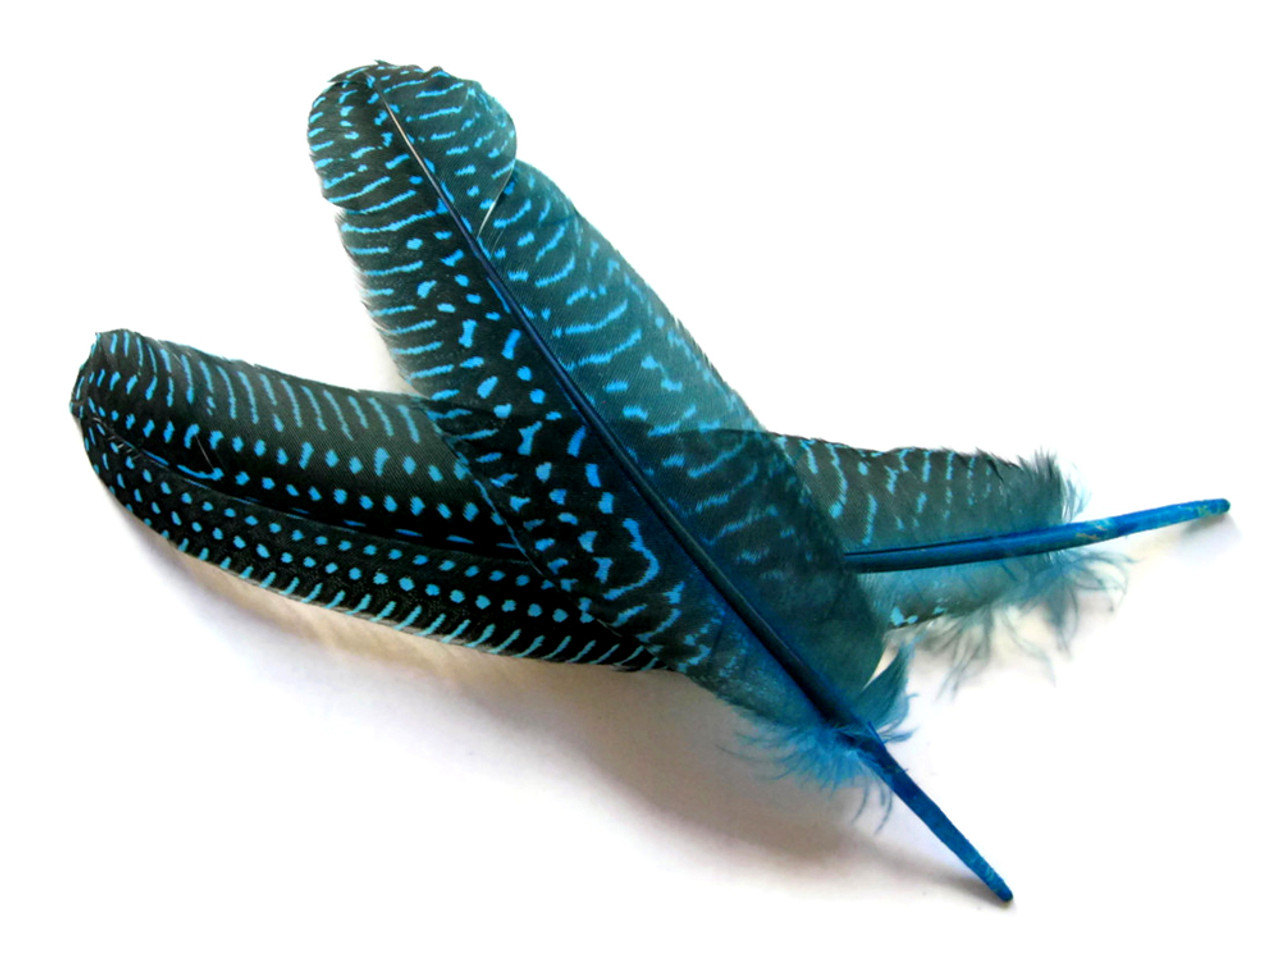 Goose Pointer Feathers for Quills – ArteOfTheBooke